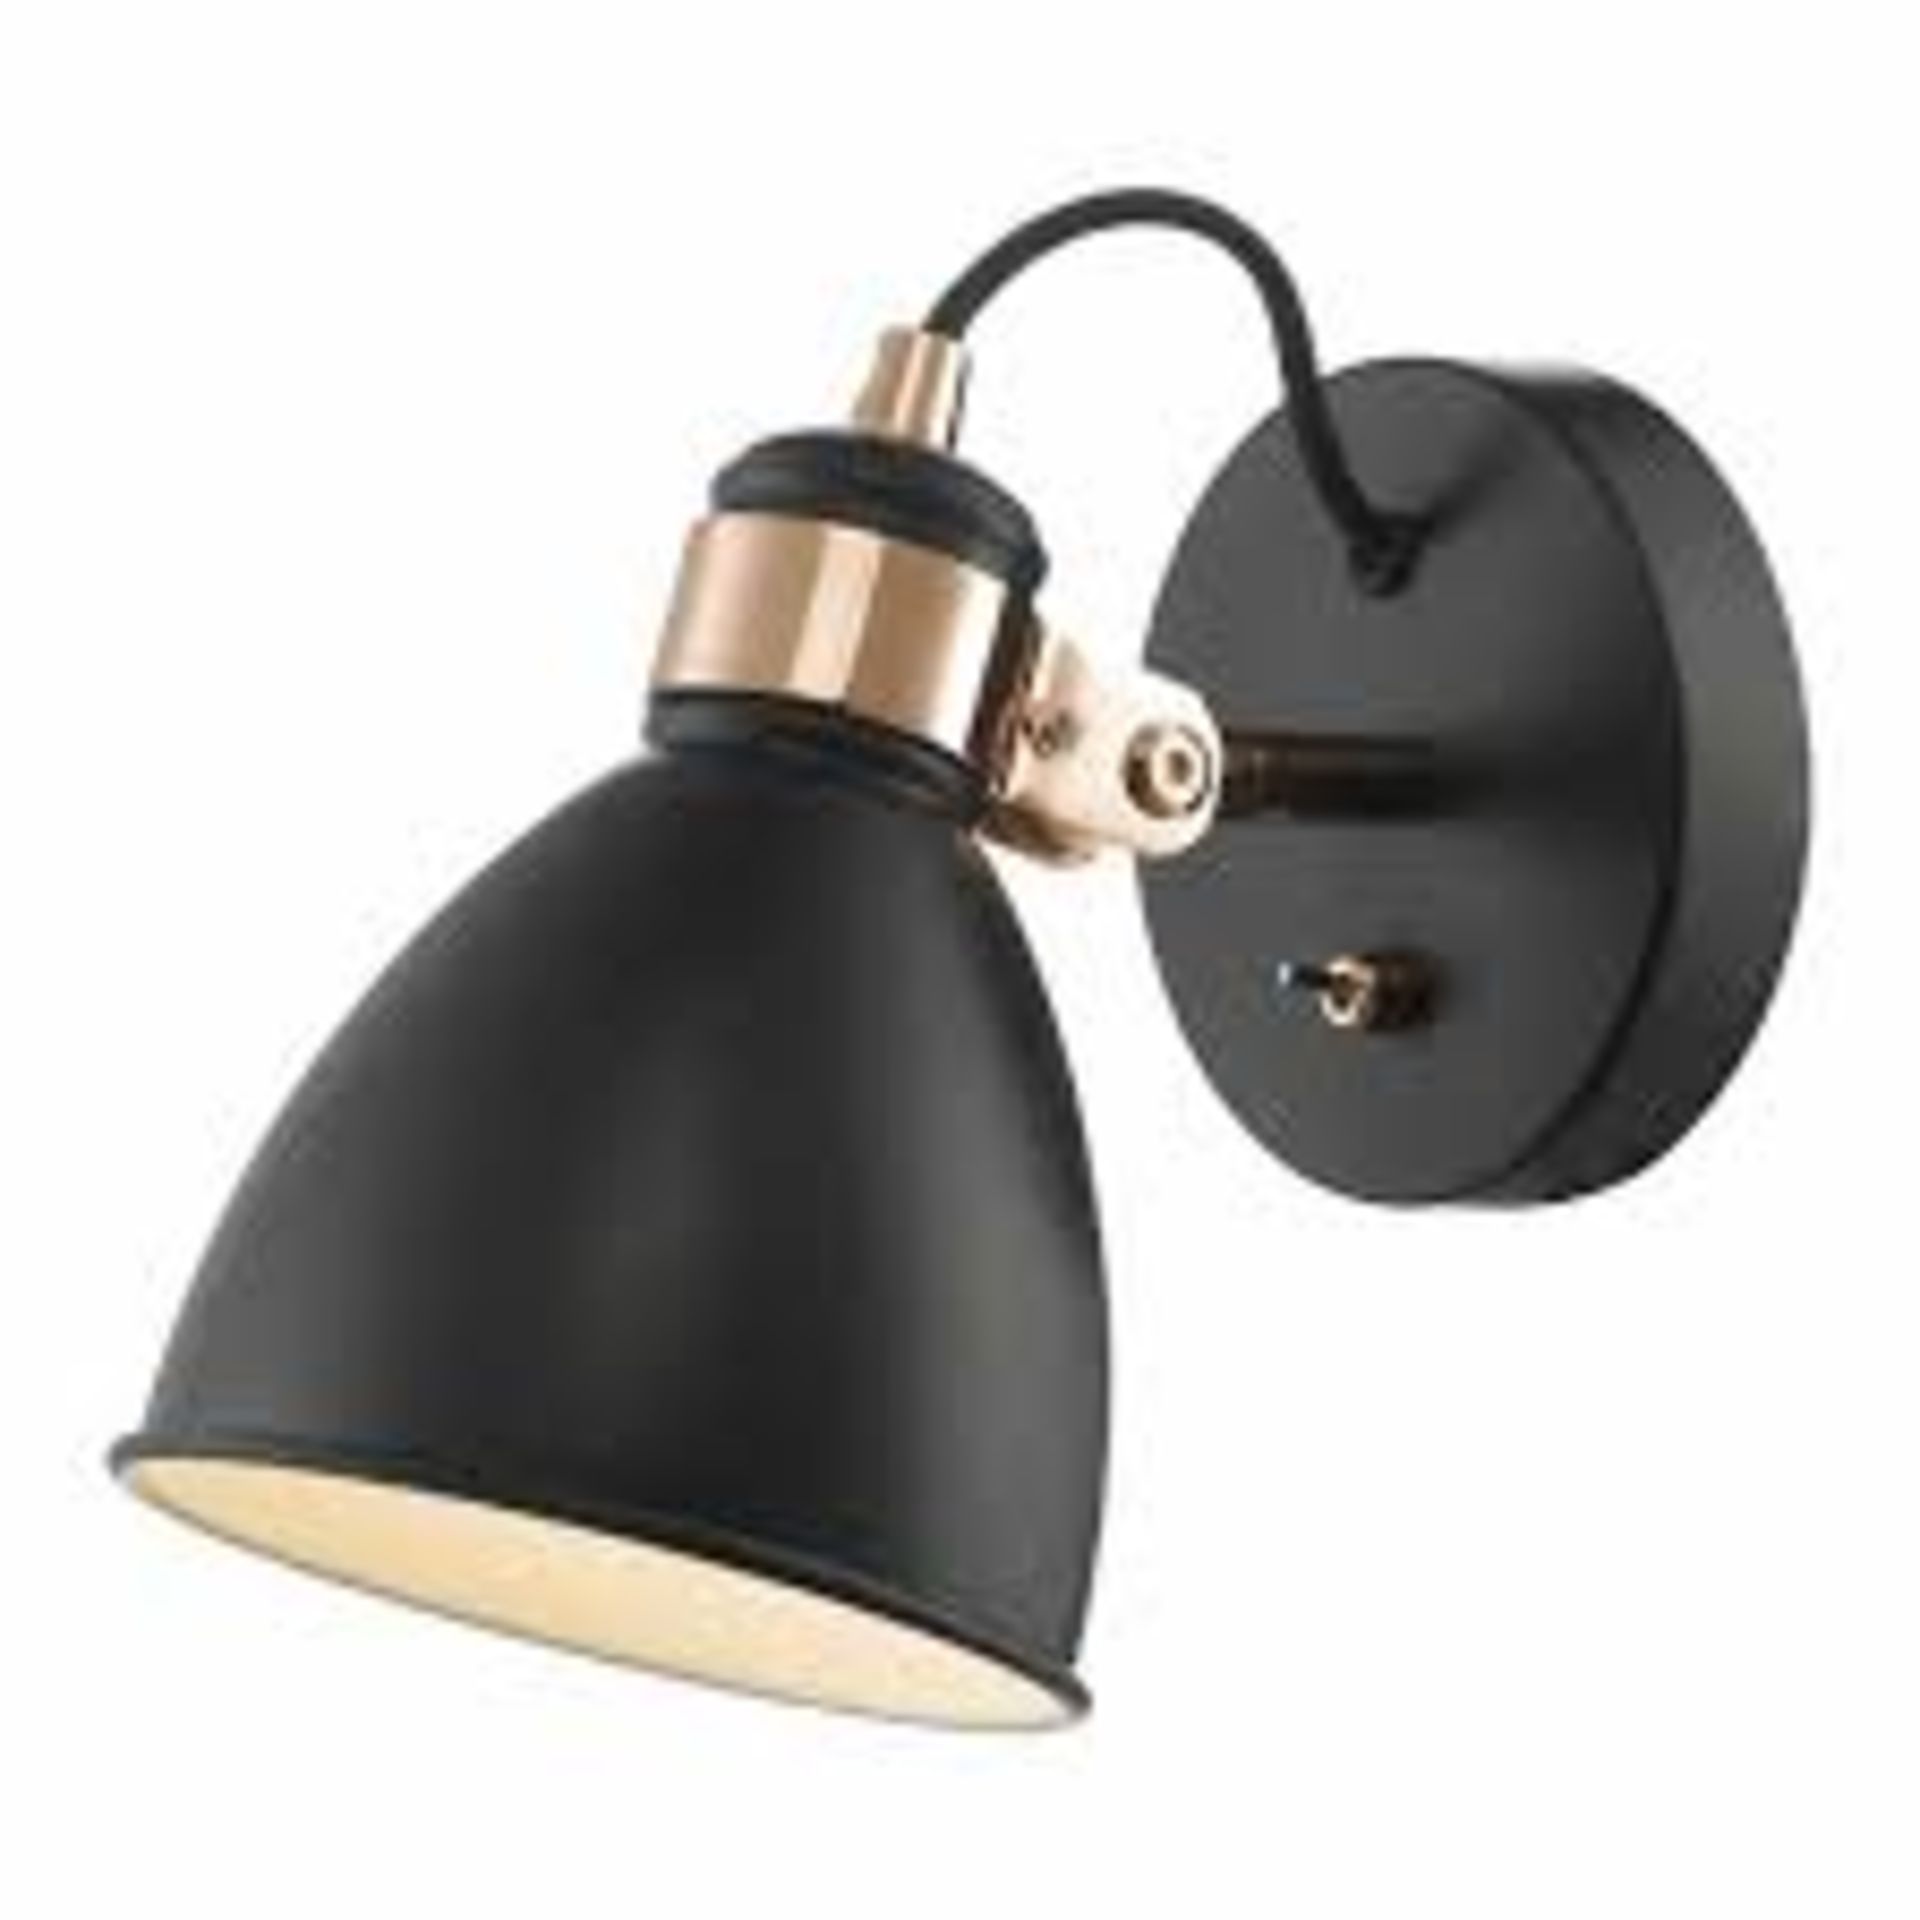 Boxed Darklighting Frederick Grey & Copper Wall Light RRP £60 (Pictures Are For Illustration